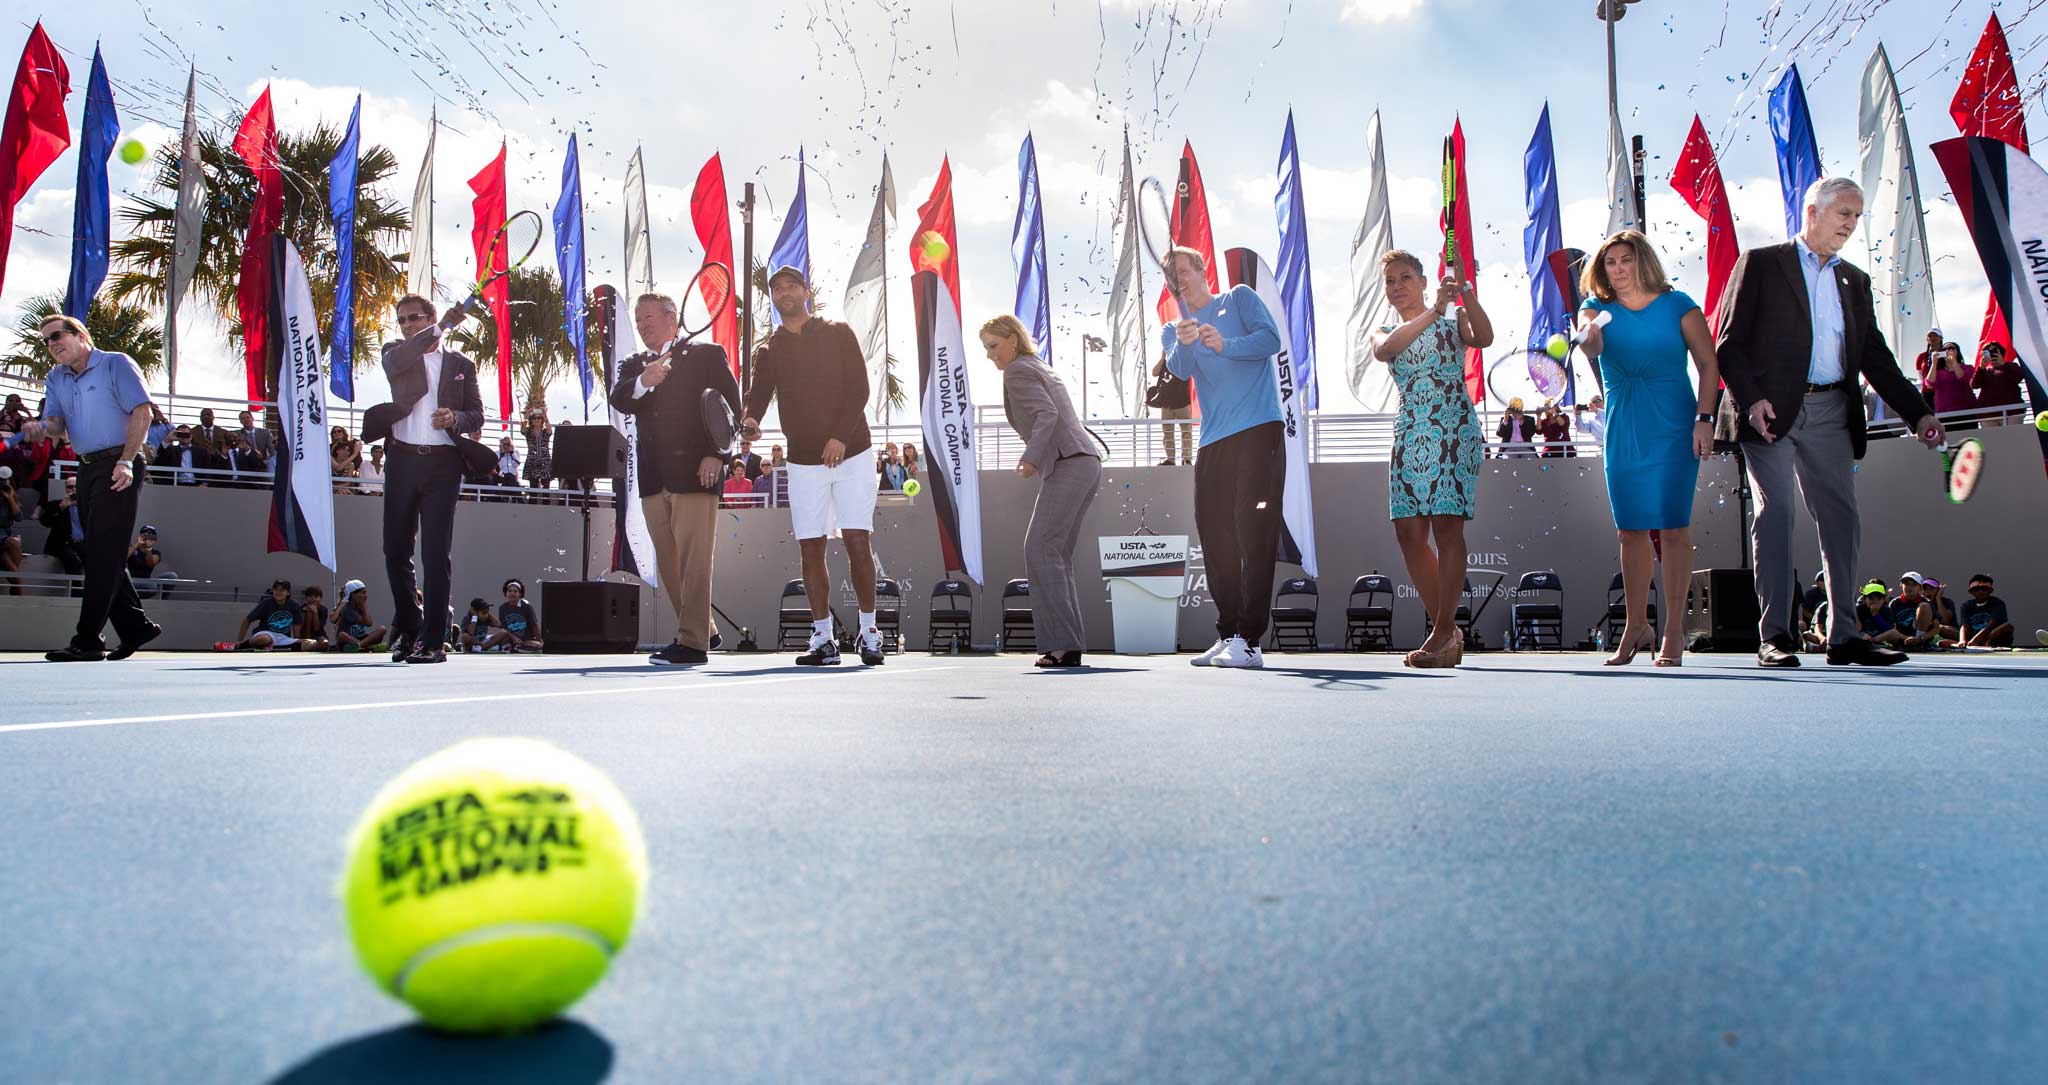 National Campus ushers in new era for American tennis